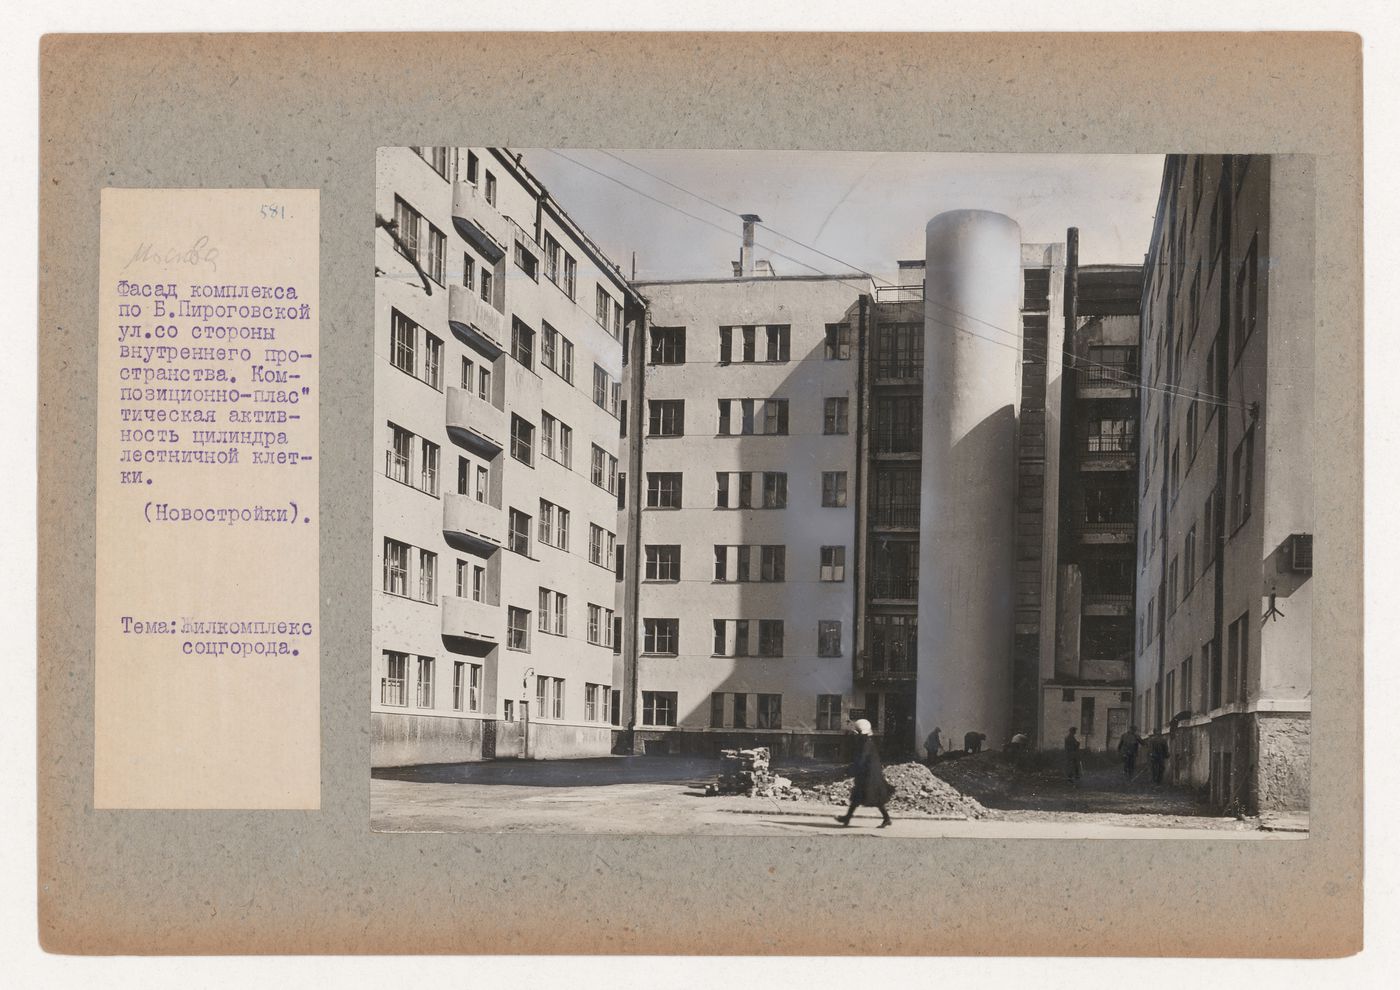 View of the housing complex from the courtyard, 45/51 Bol'shaia Pirogovskaia Street, Moscow